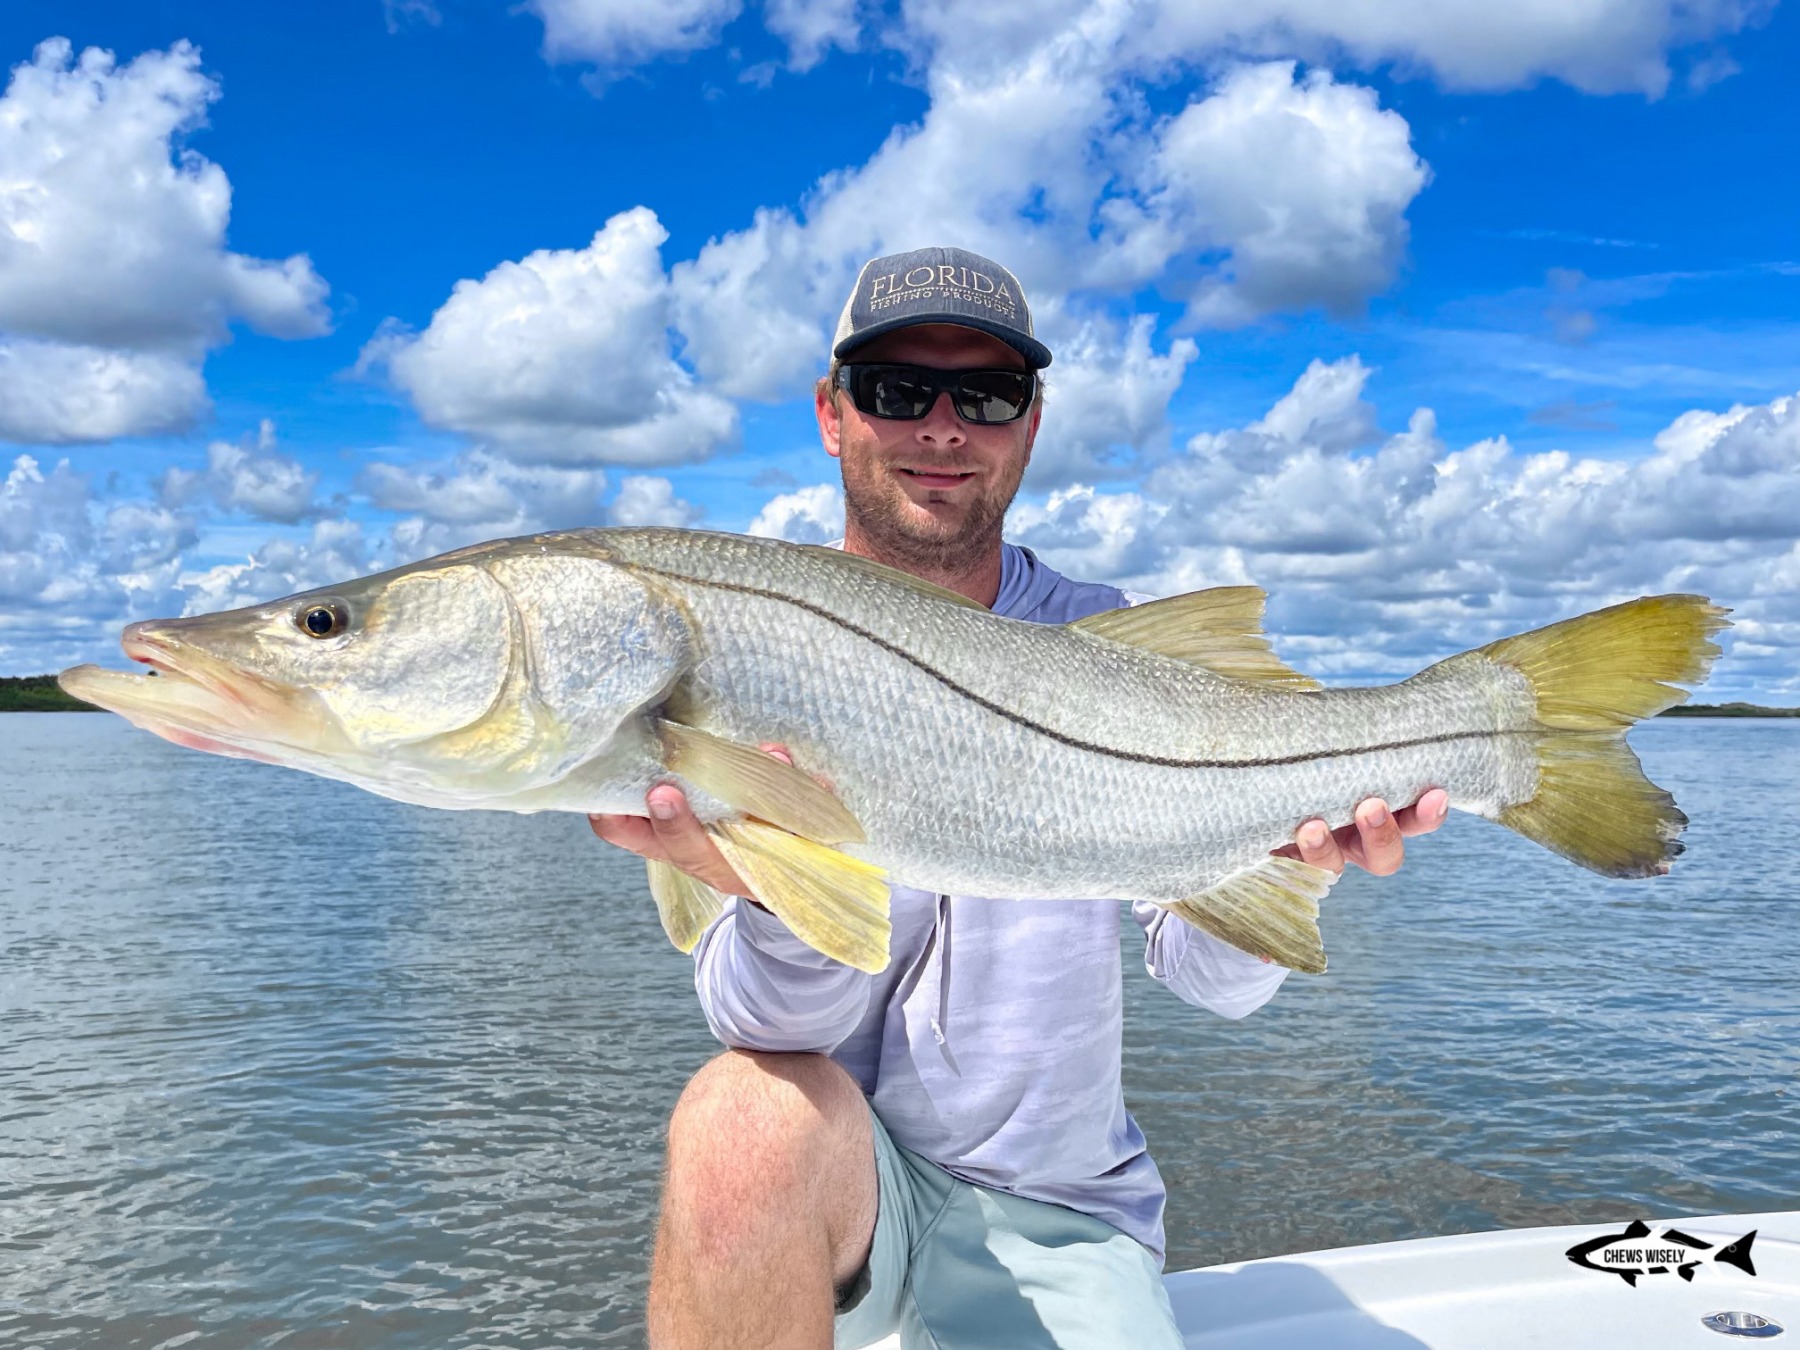 Ponce Inlet fishing charter